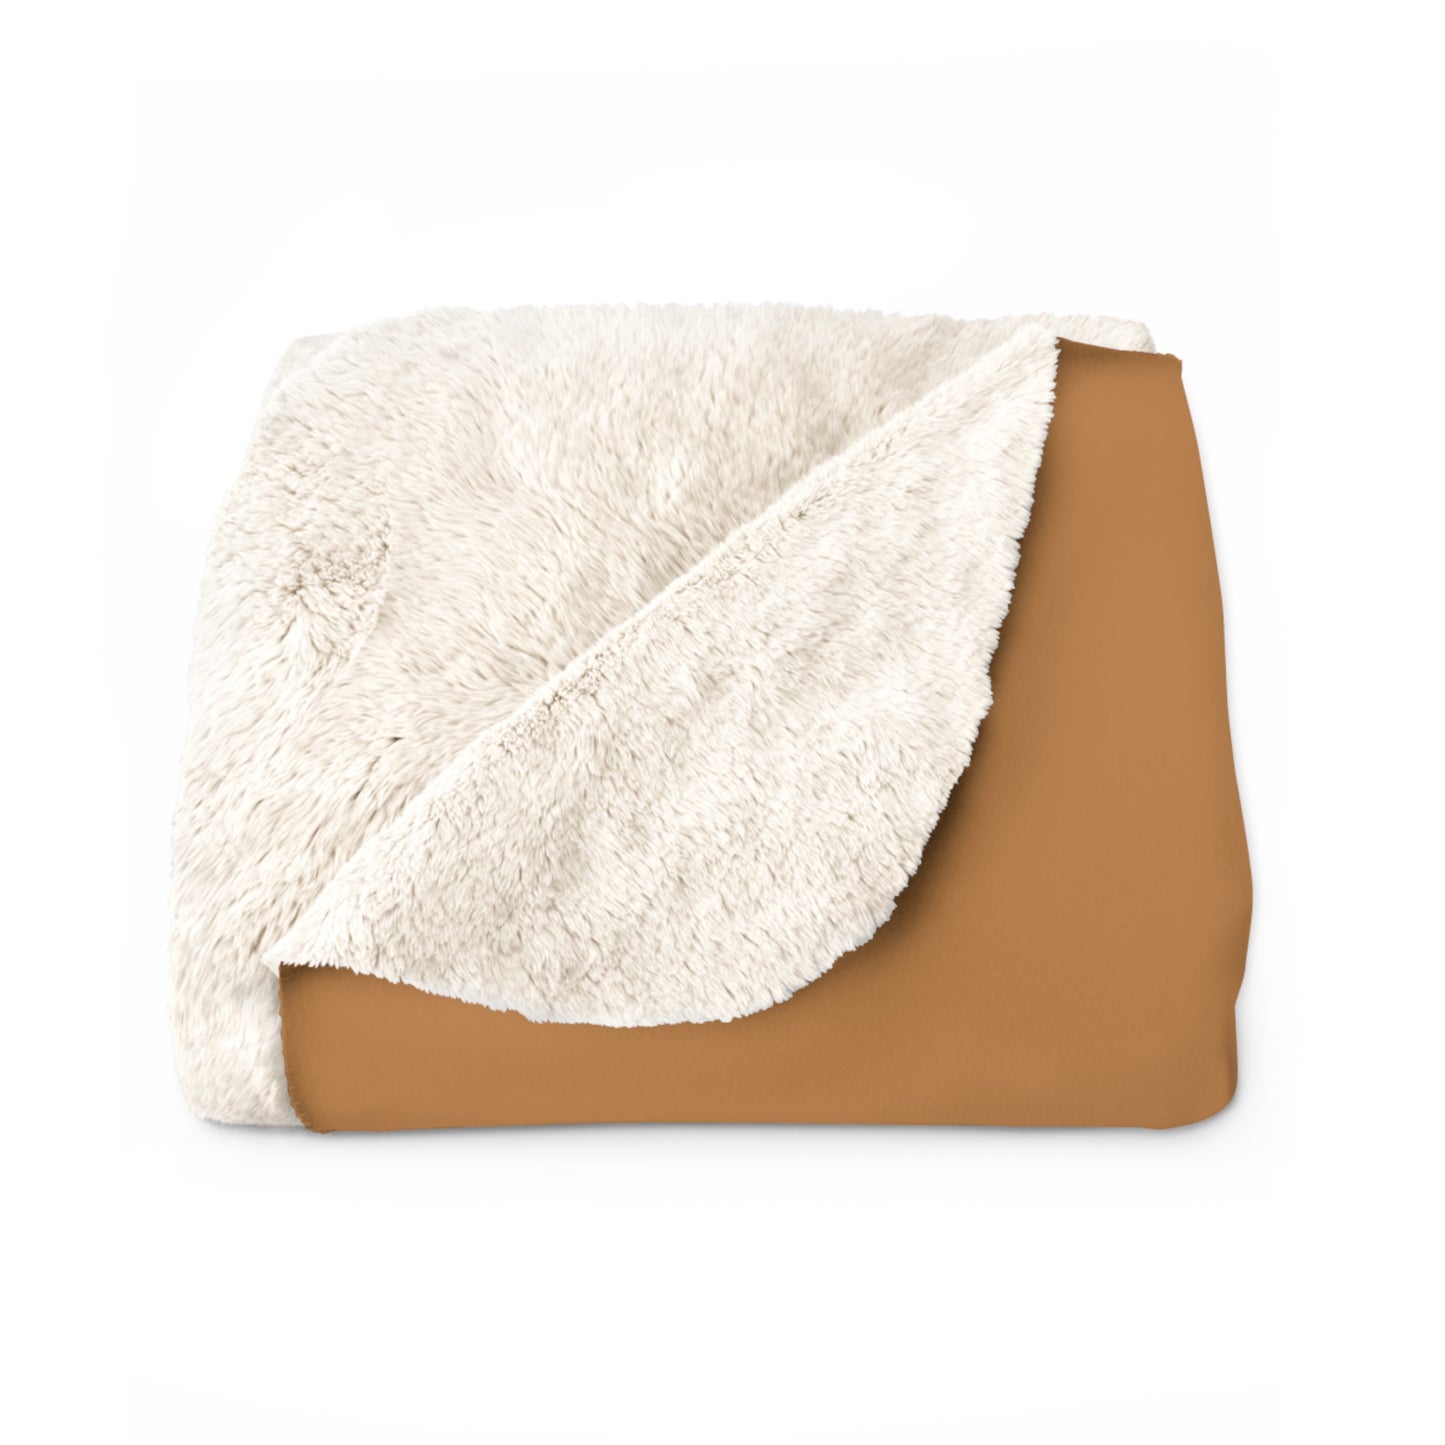 LUXURIOUS COZY BLANKET: THE EPITOME OF COMFORT AND WARMTH | Dog light brown